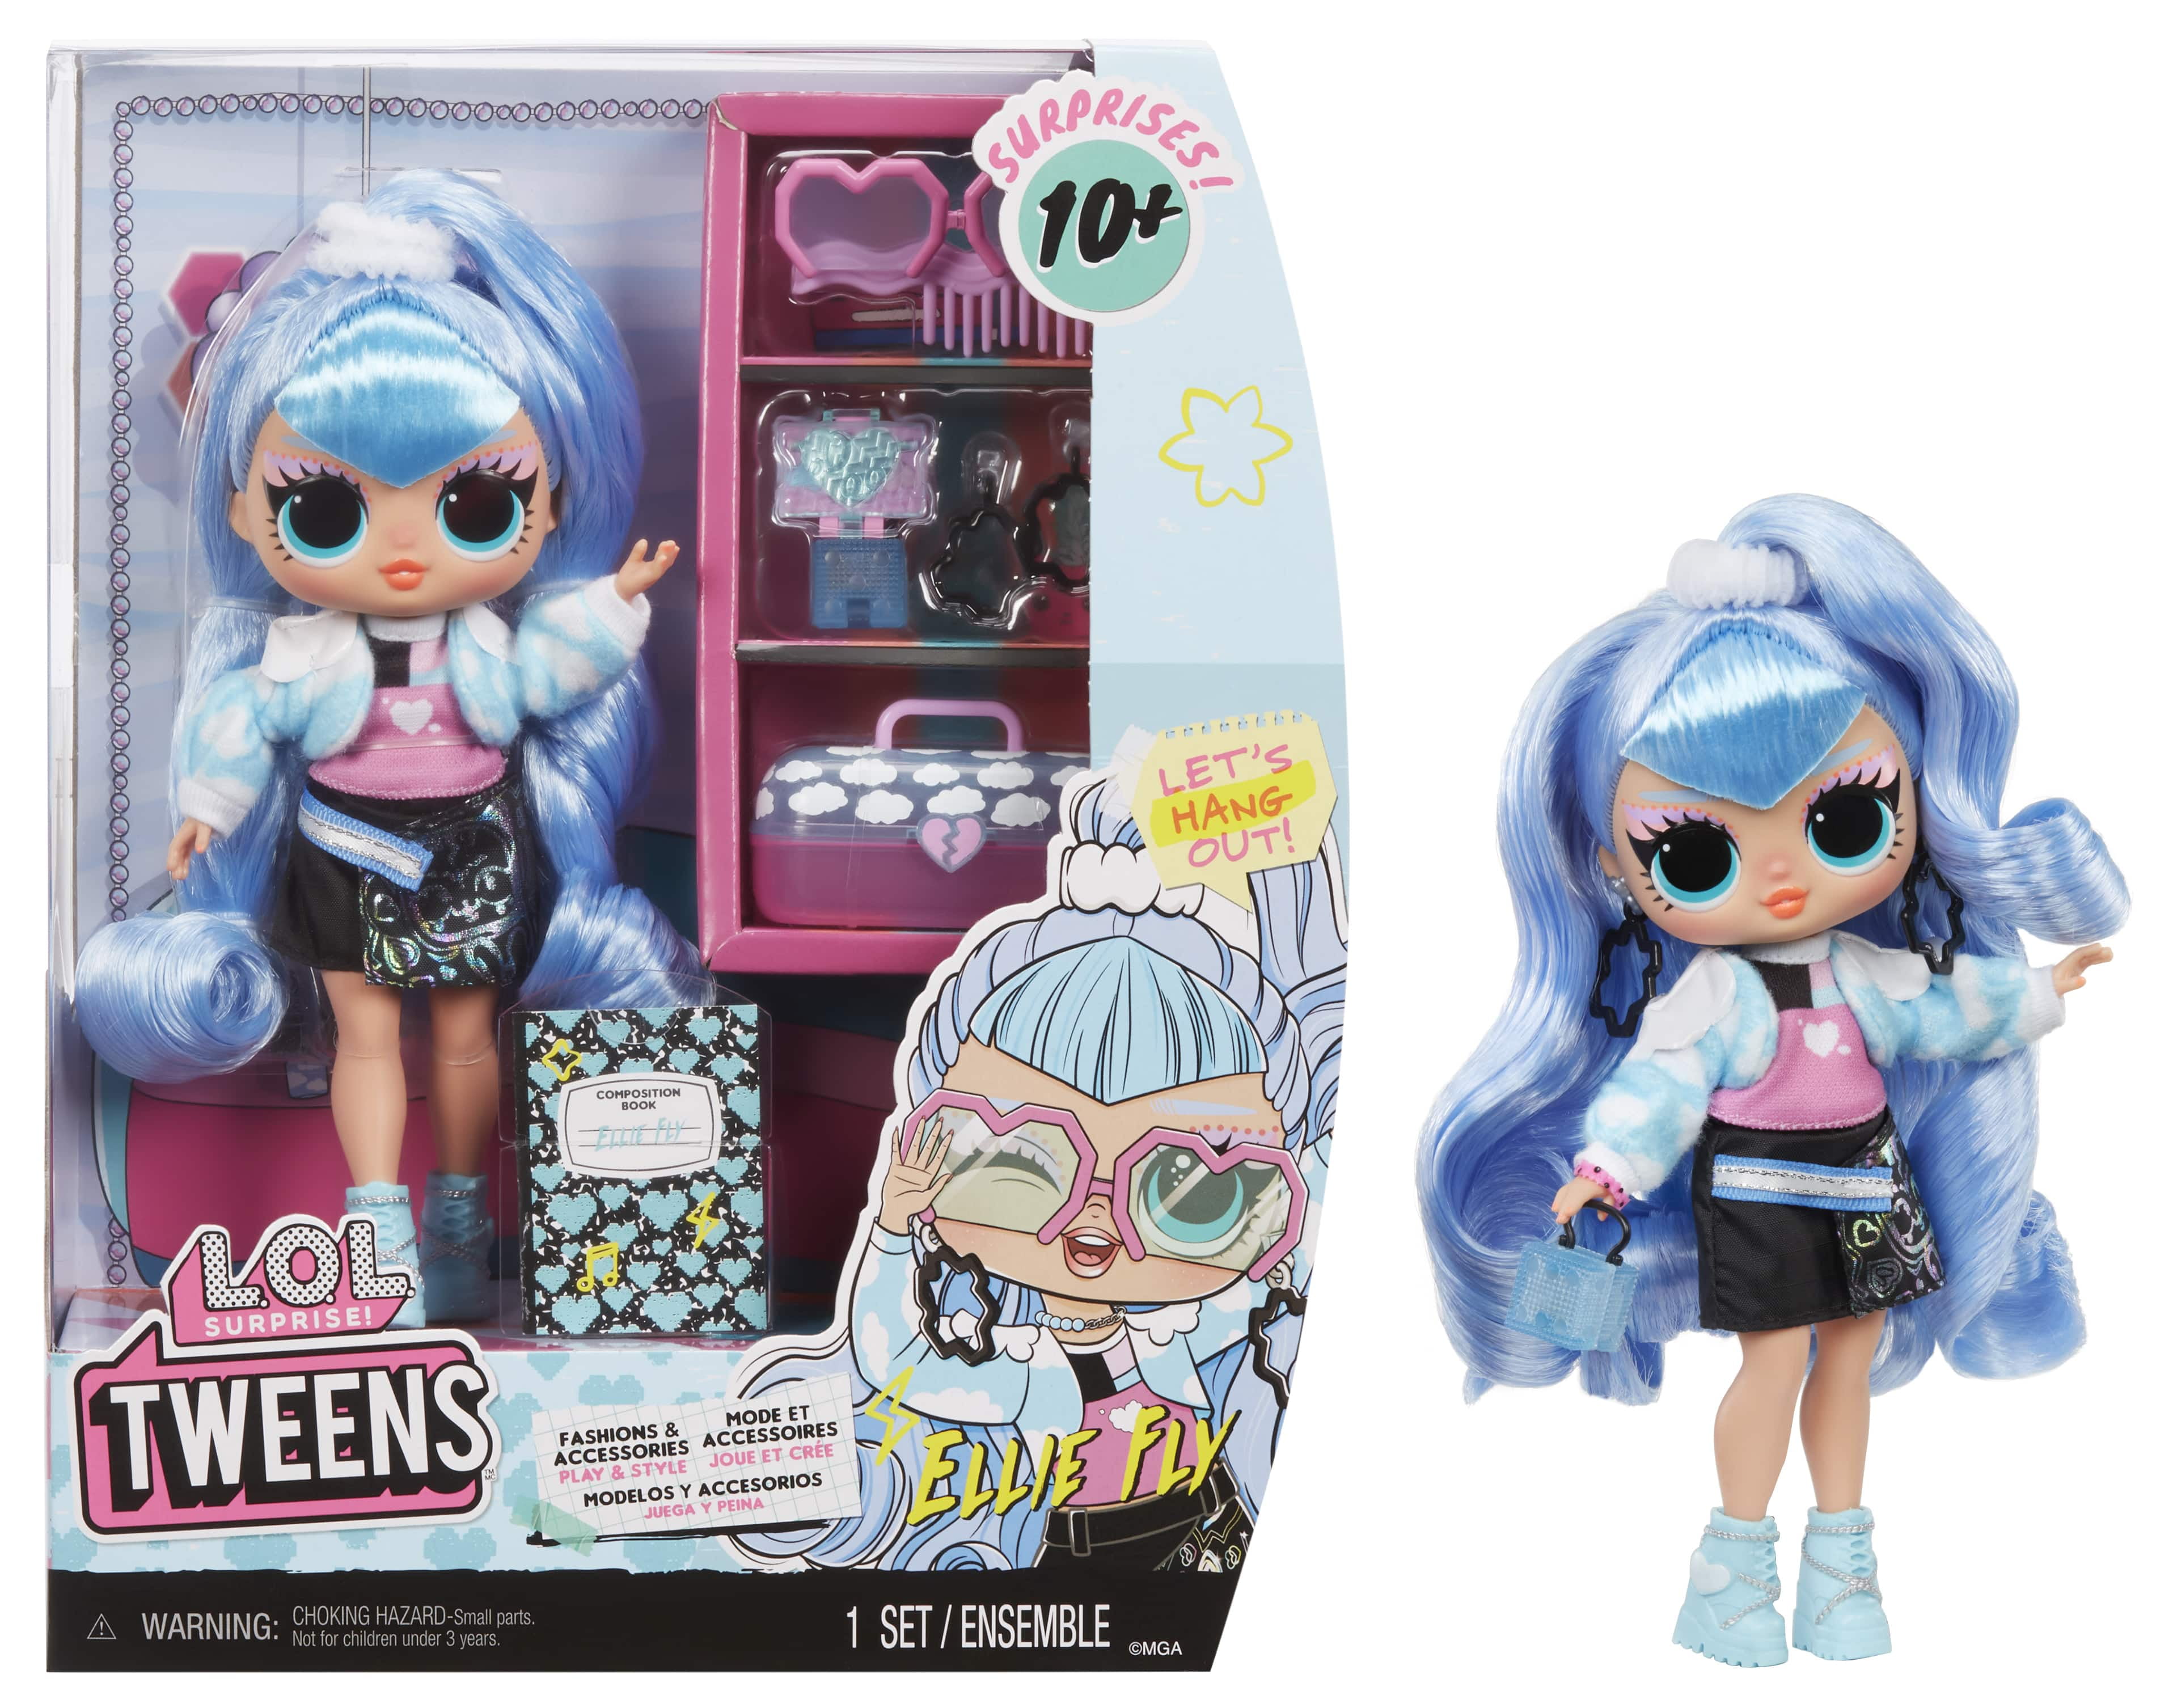  L.O.L. Surprise! 707 Queen Bee Doll with 7 Surprises in Paper  Ball- Collectible w/Water Surprise & Fashion Accessories, Holiday Toy,  Great Gift for Kids Ages 4 5 6+ Years Old Collectors 